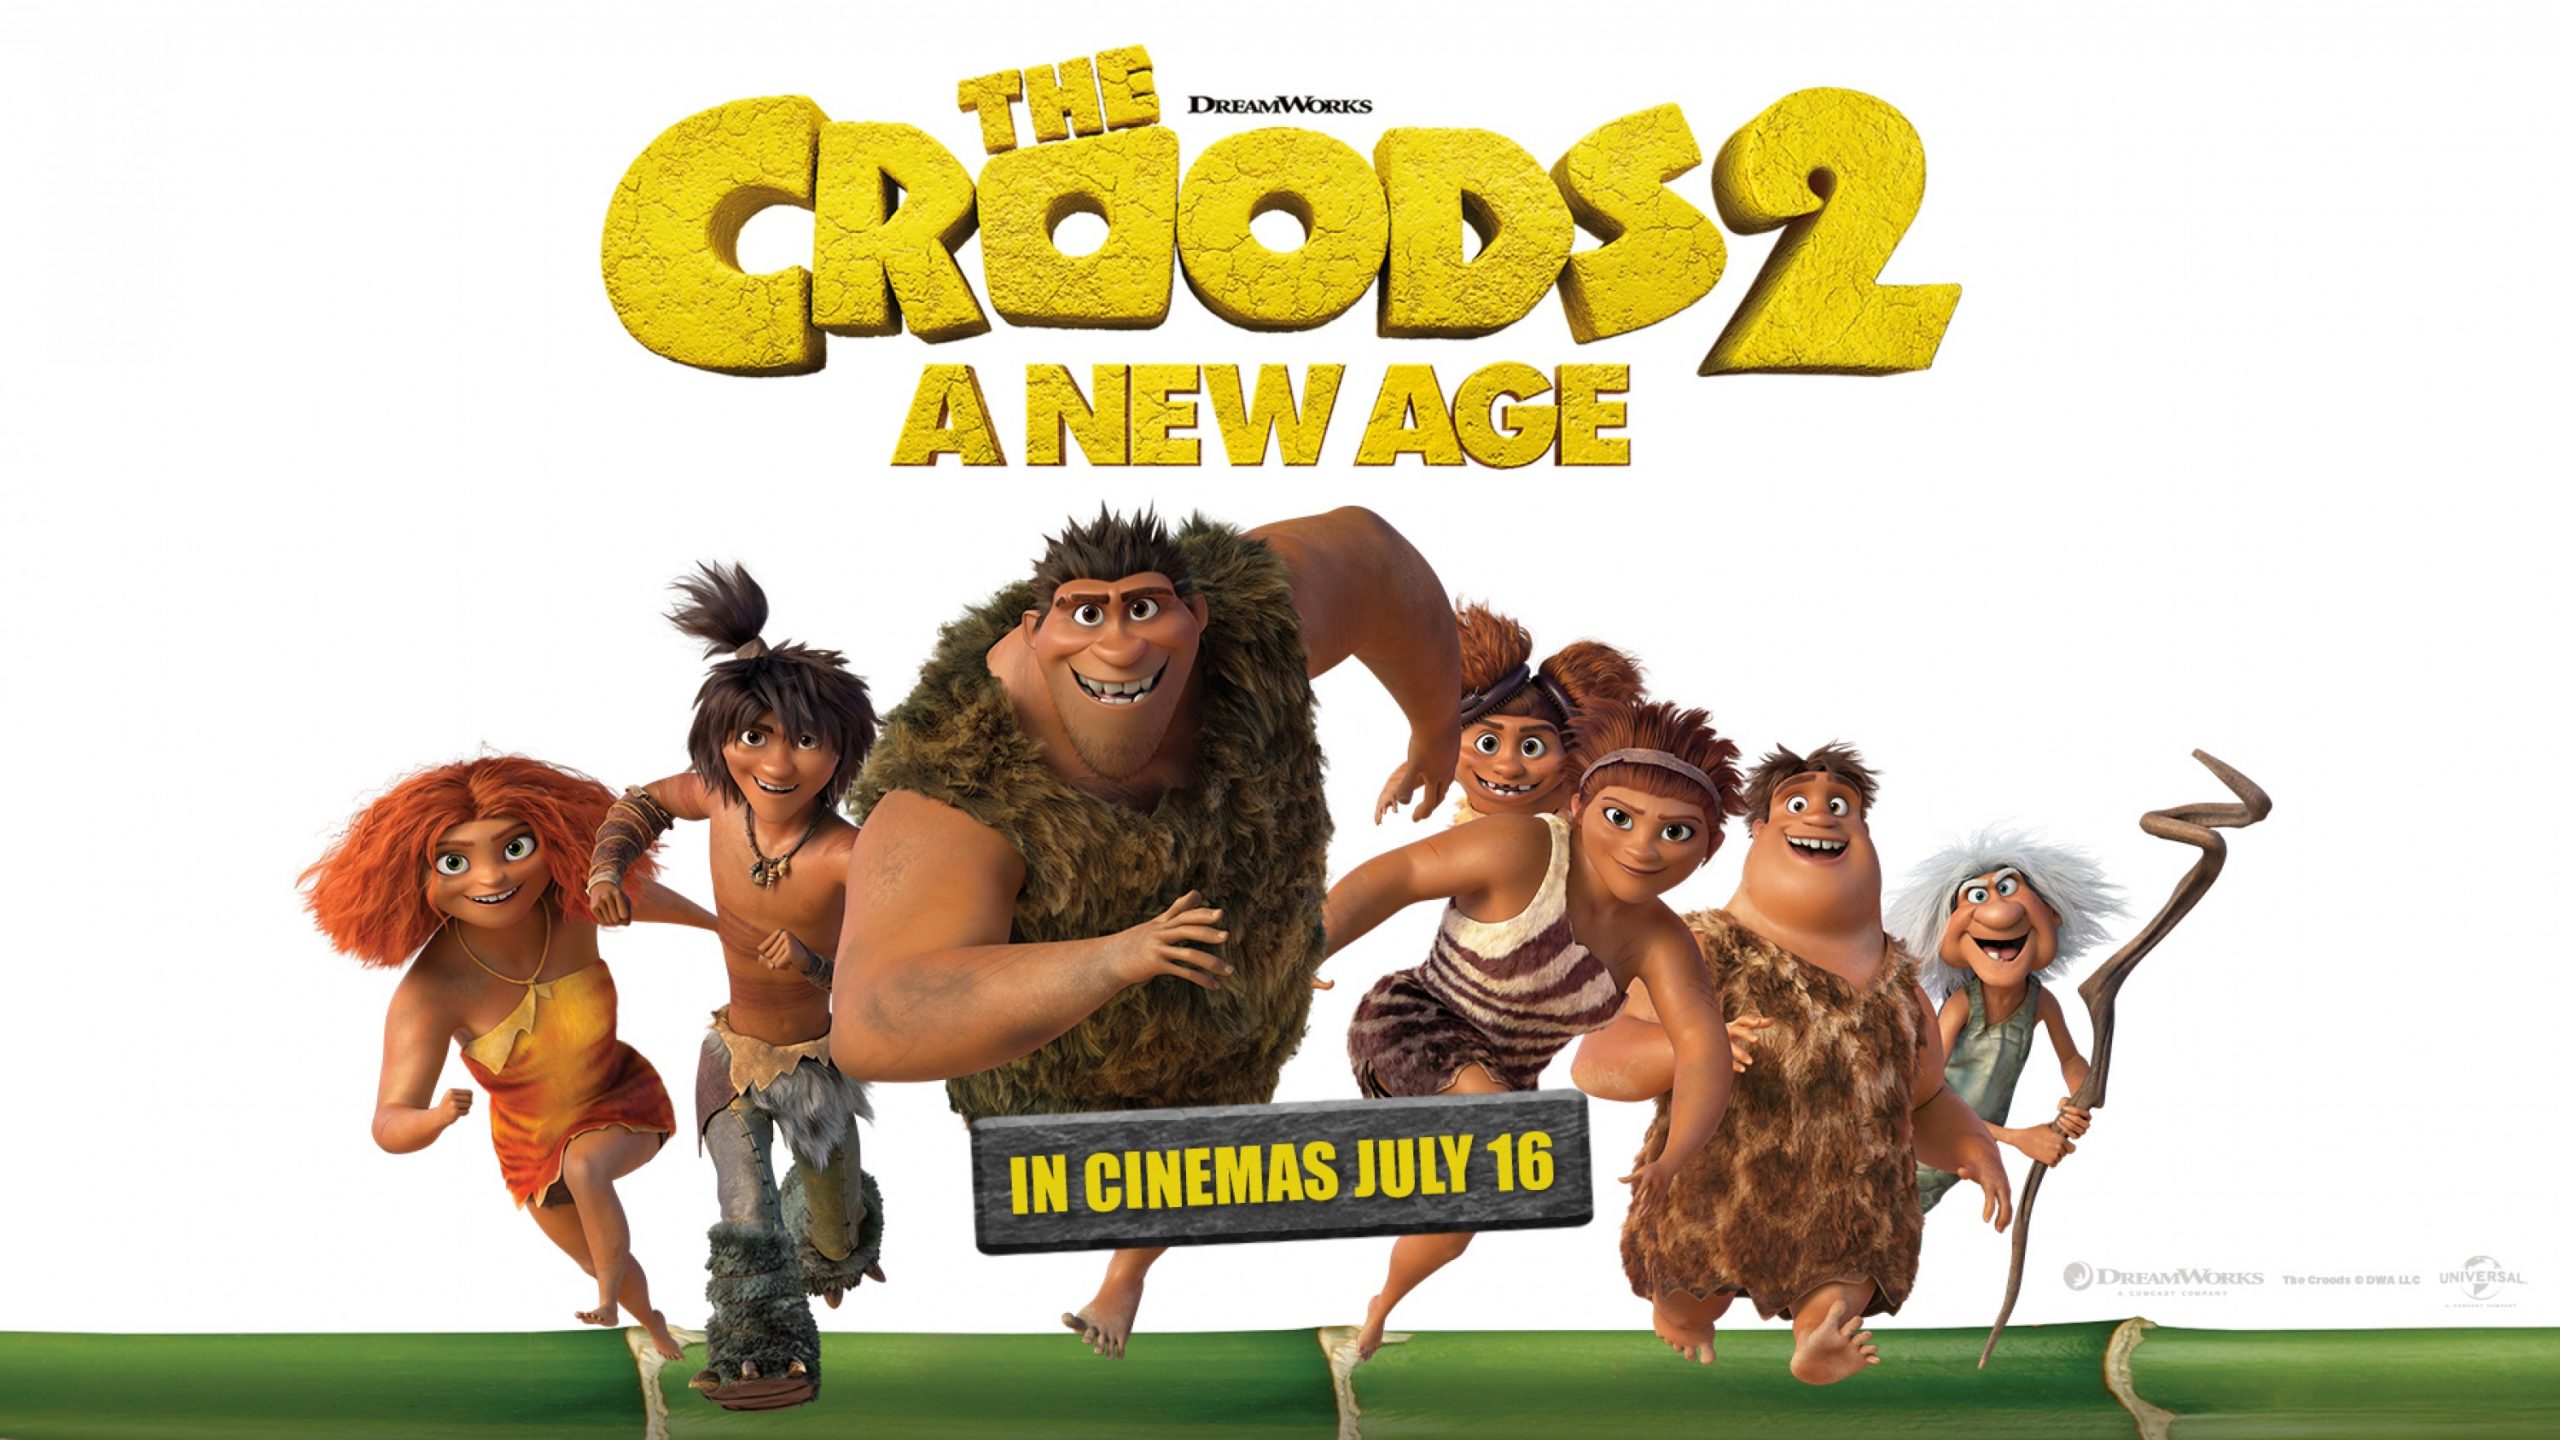 The croods 2 Full Movie Download